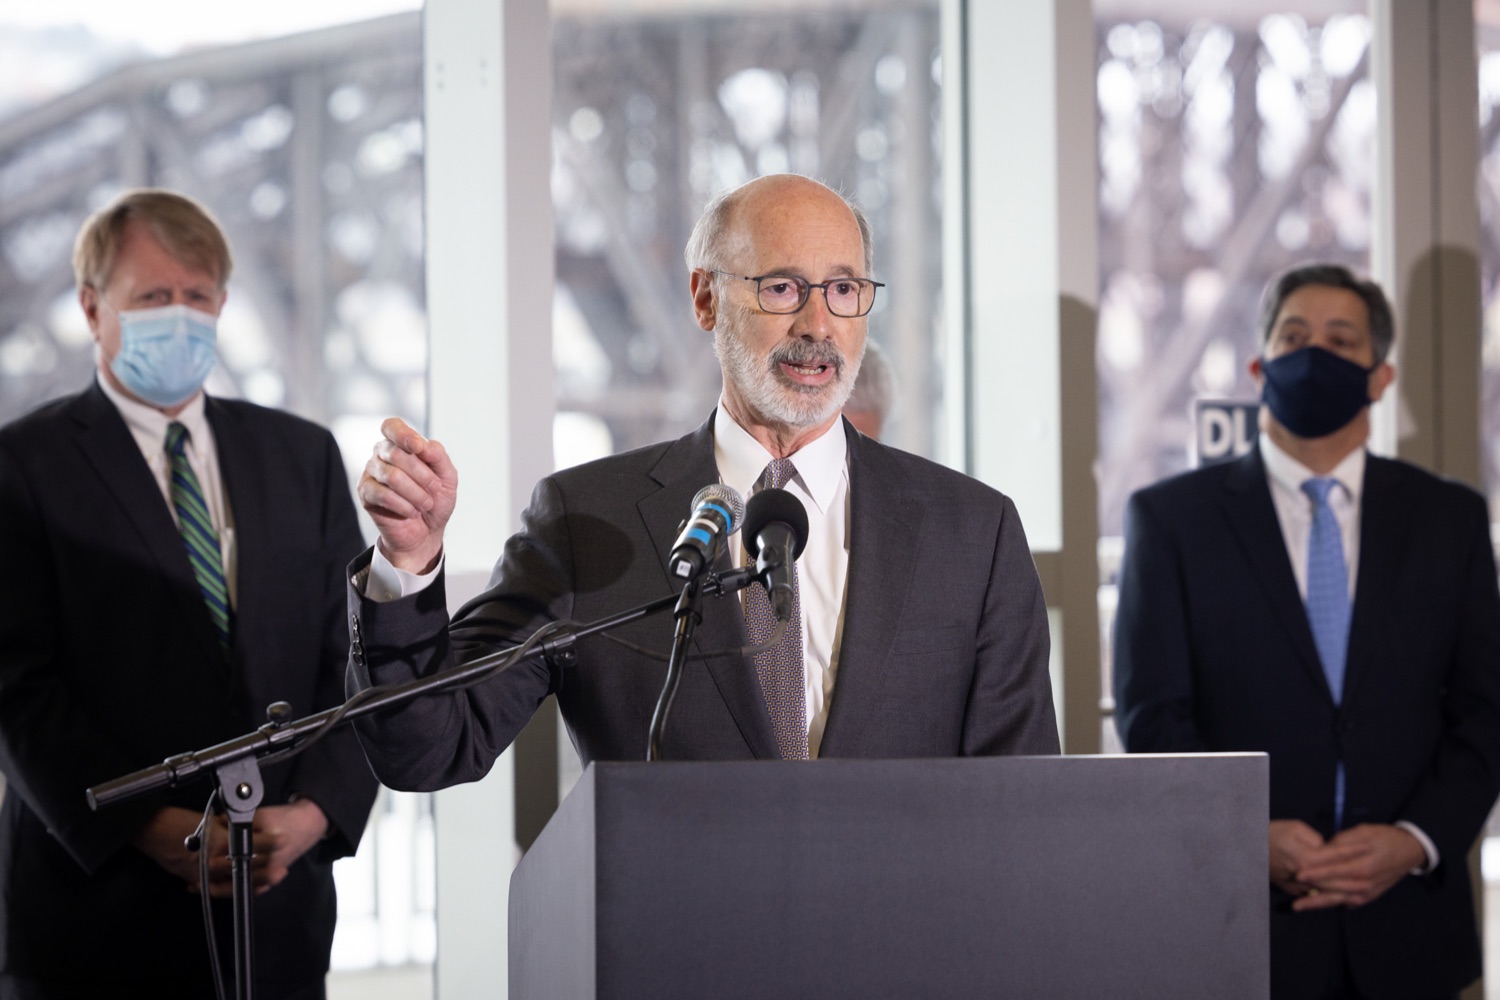 Pennsylvania Governor Tom Wolf speaks with the press.  Governor Tom Wolf and Pennsylvania Department of Transportation (PennDOT) Deputy Secretary for Multimodal Transportation Jennie Louwerse were joined by Federal Railroad Administration Administrator Amit Bose, Norfolk Southern (NS) Regional Vice President Rudy Husband and local officials today to announce that the federal Bipartisan Infrastructure Law (BIL) has paved the way for movement toward improved freight and passenger-rail service between Harrisburg and Pittsburgh. Pittsburgh, PA  February 18, 2022<br><a href="https://filesource.amperwave.net/commonwealthofpa/photo/20547_gov_infrastructure_dz_011.jpg" target="_blank">⇣ Download Photo</a>